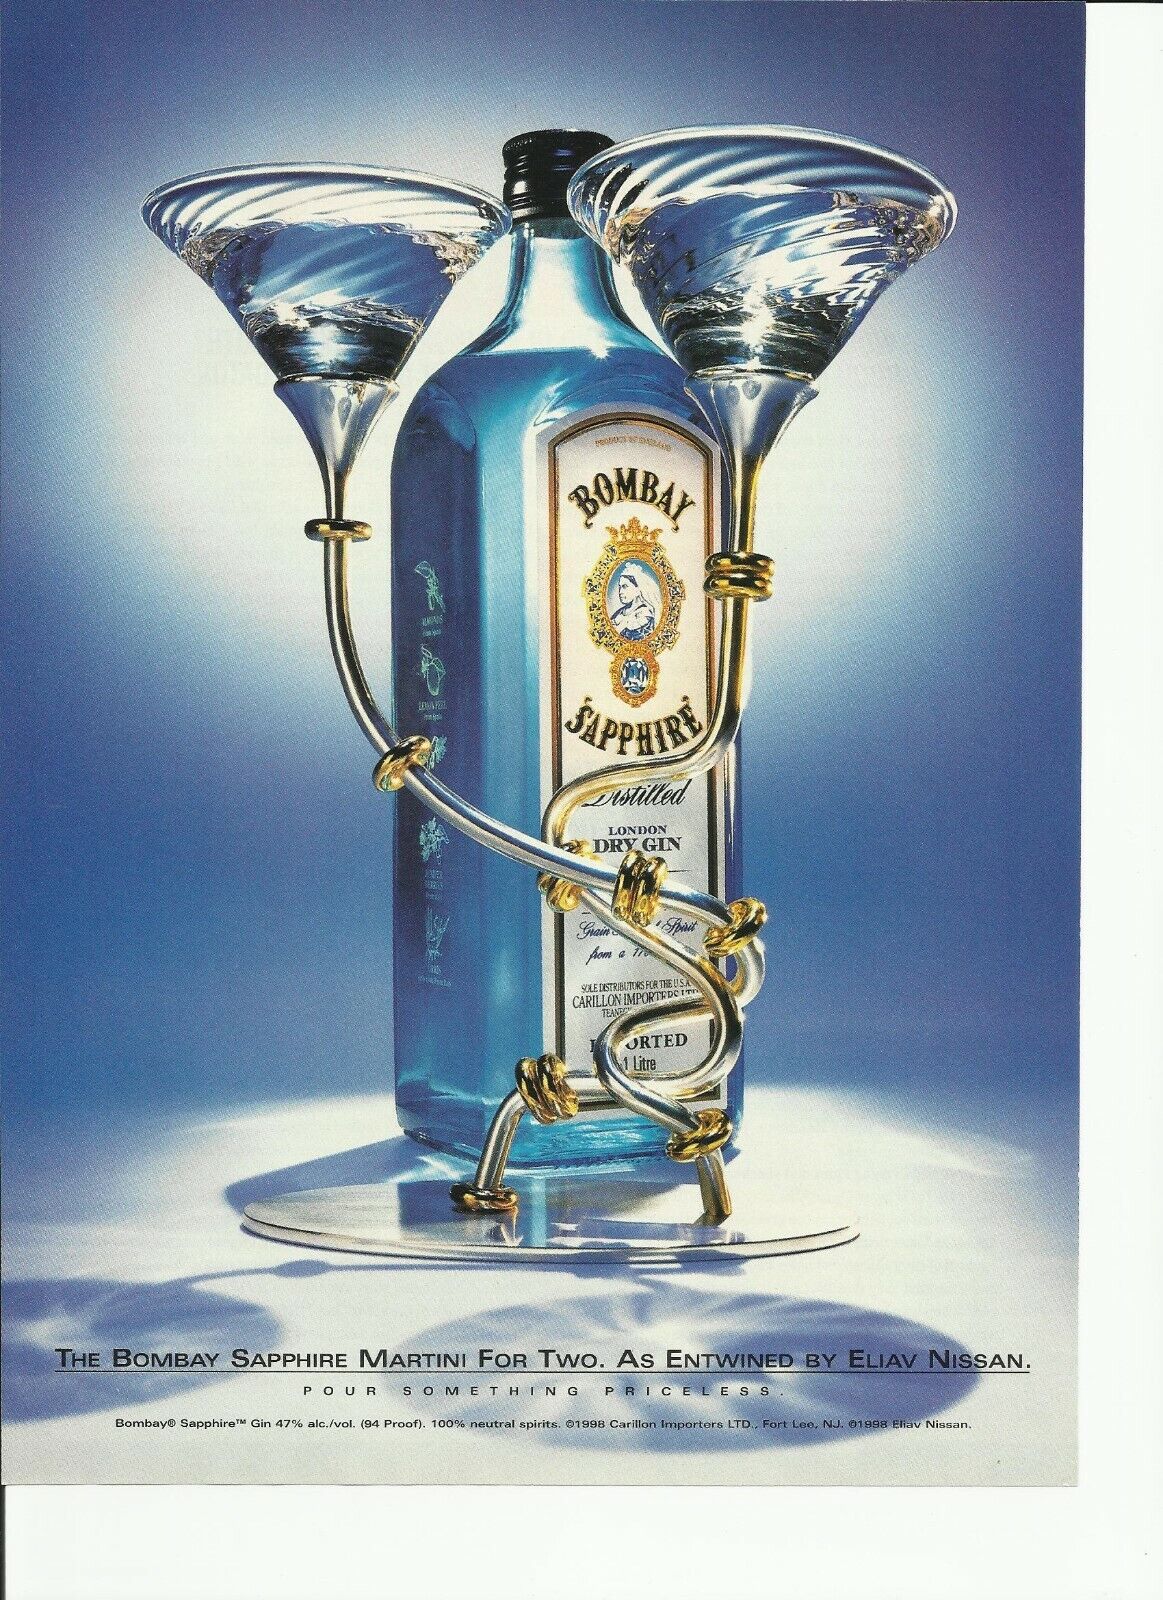 The Bombay Sapphire Martini for Two./ Eliay Nissan- \'98/\'98 print magazine ad